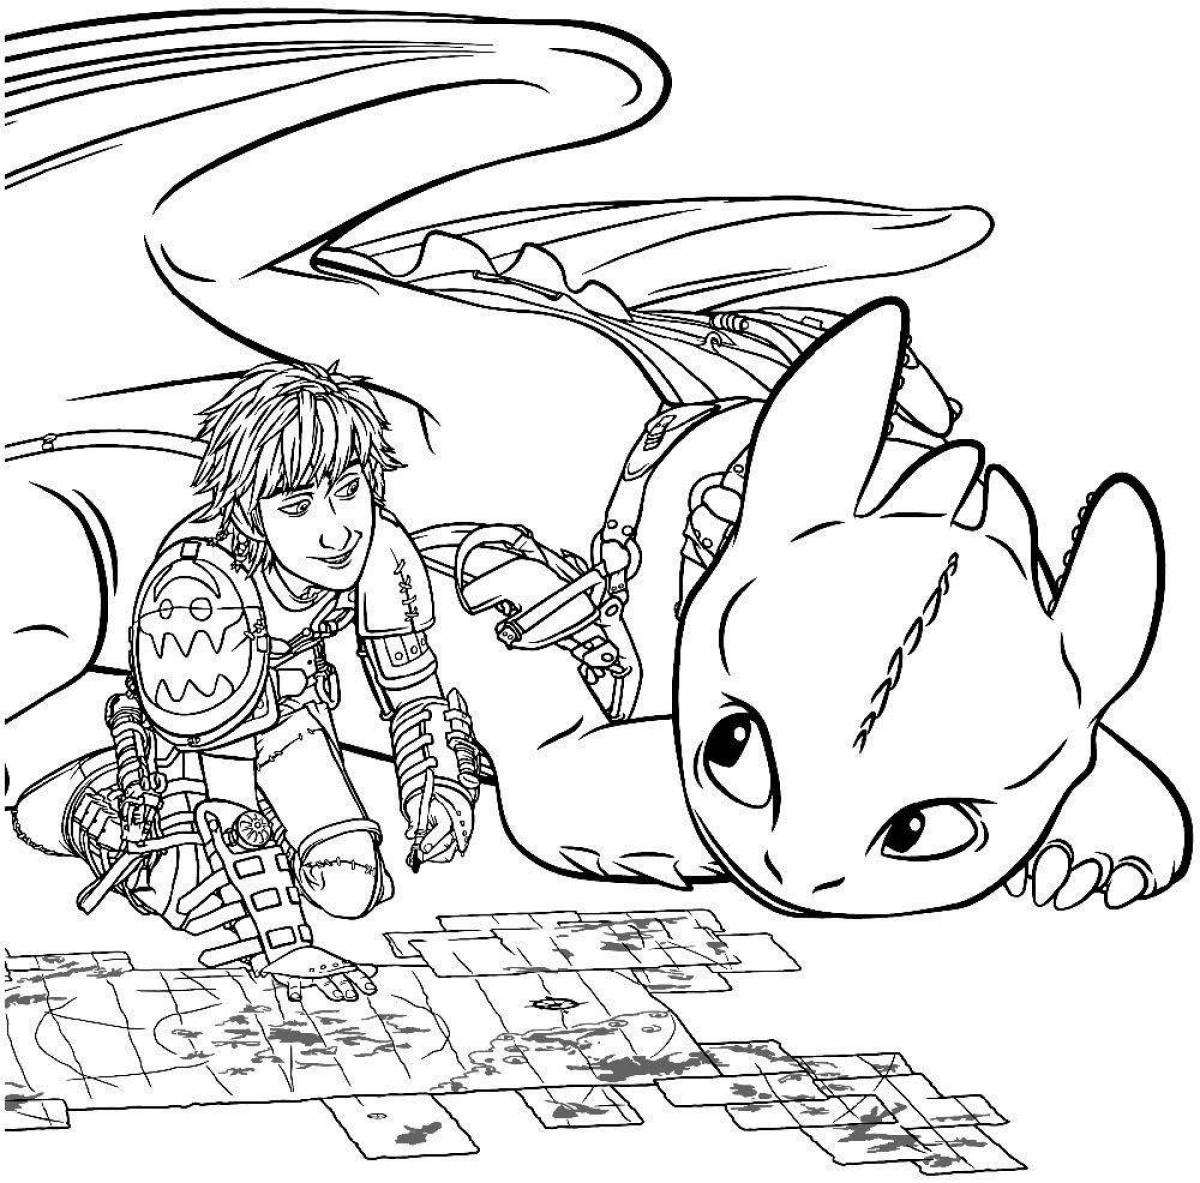 Perfect how to train your dragon 3 coloring book